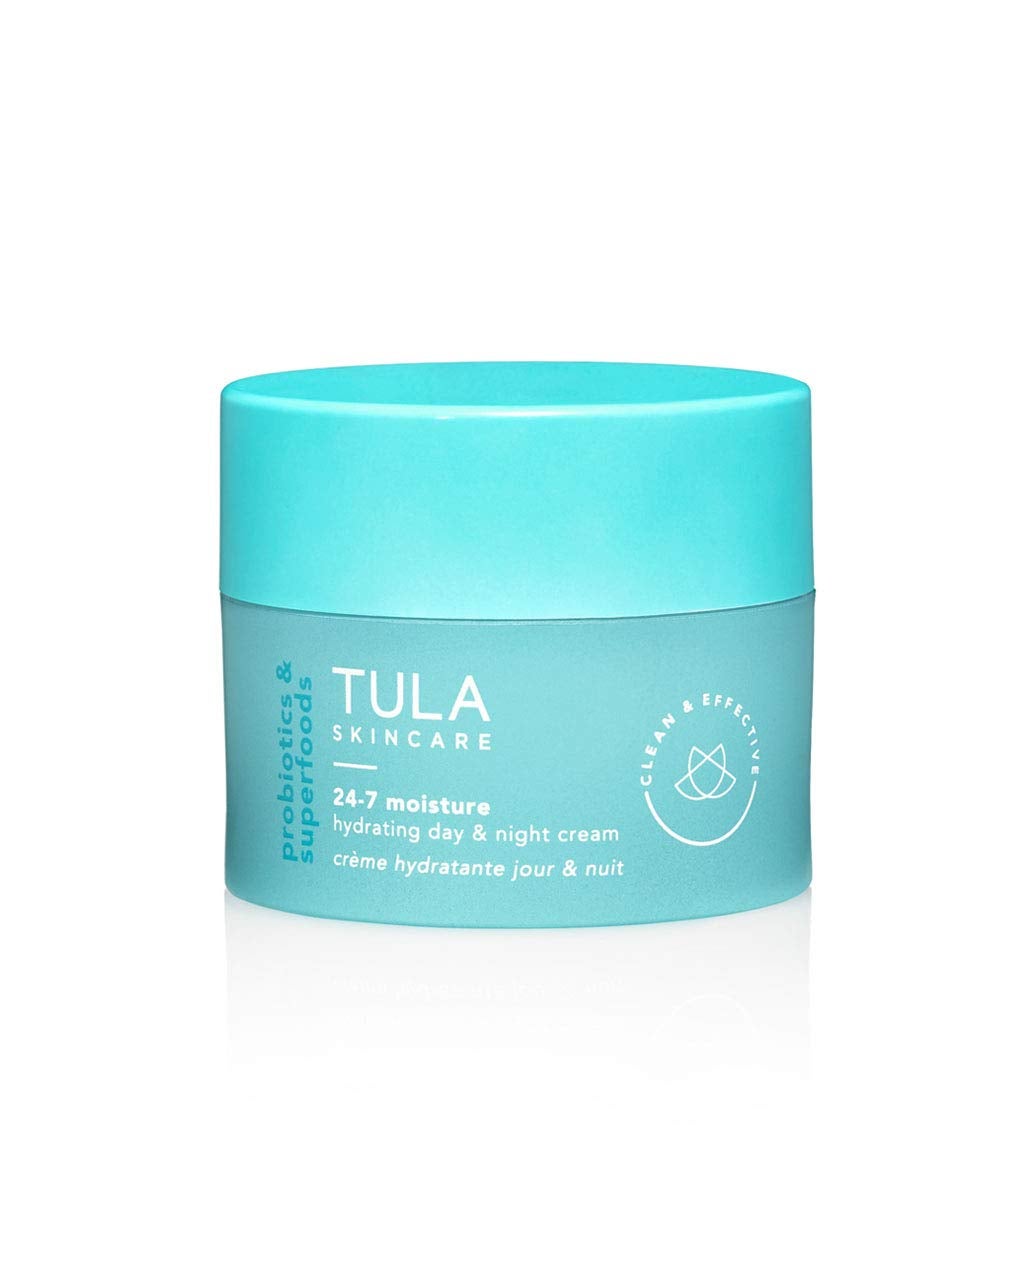 TULA Probiotic Skin Care 24-7 Moisture Hydrating Day and Night Cream | Moisturizer for Face, Ageless is the New Anti-Aging, Face Cream, Contains Watermelon Fruit and Blueberry Extract